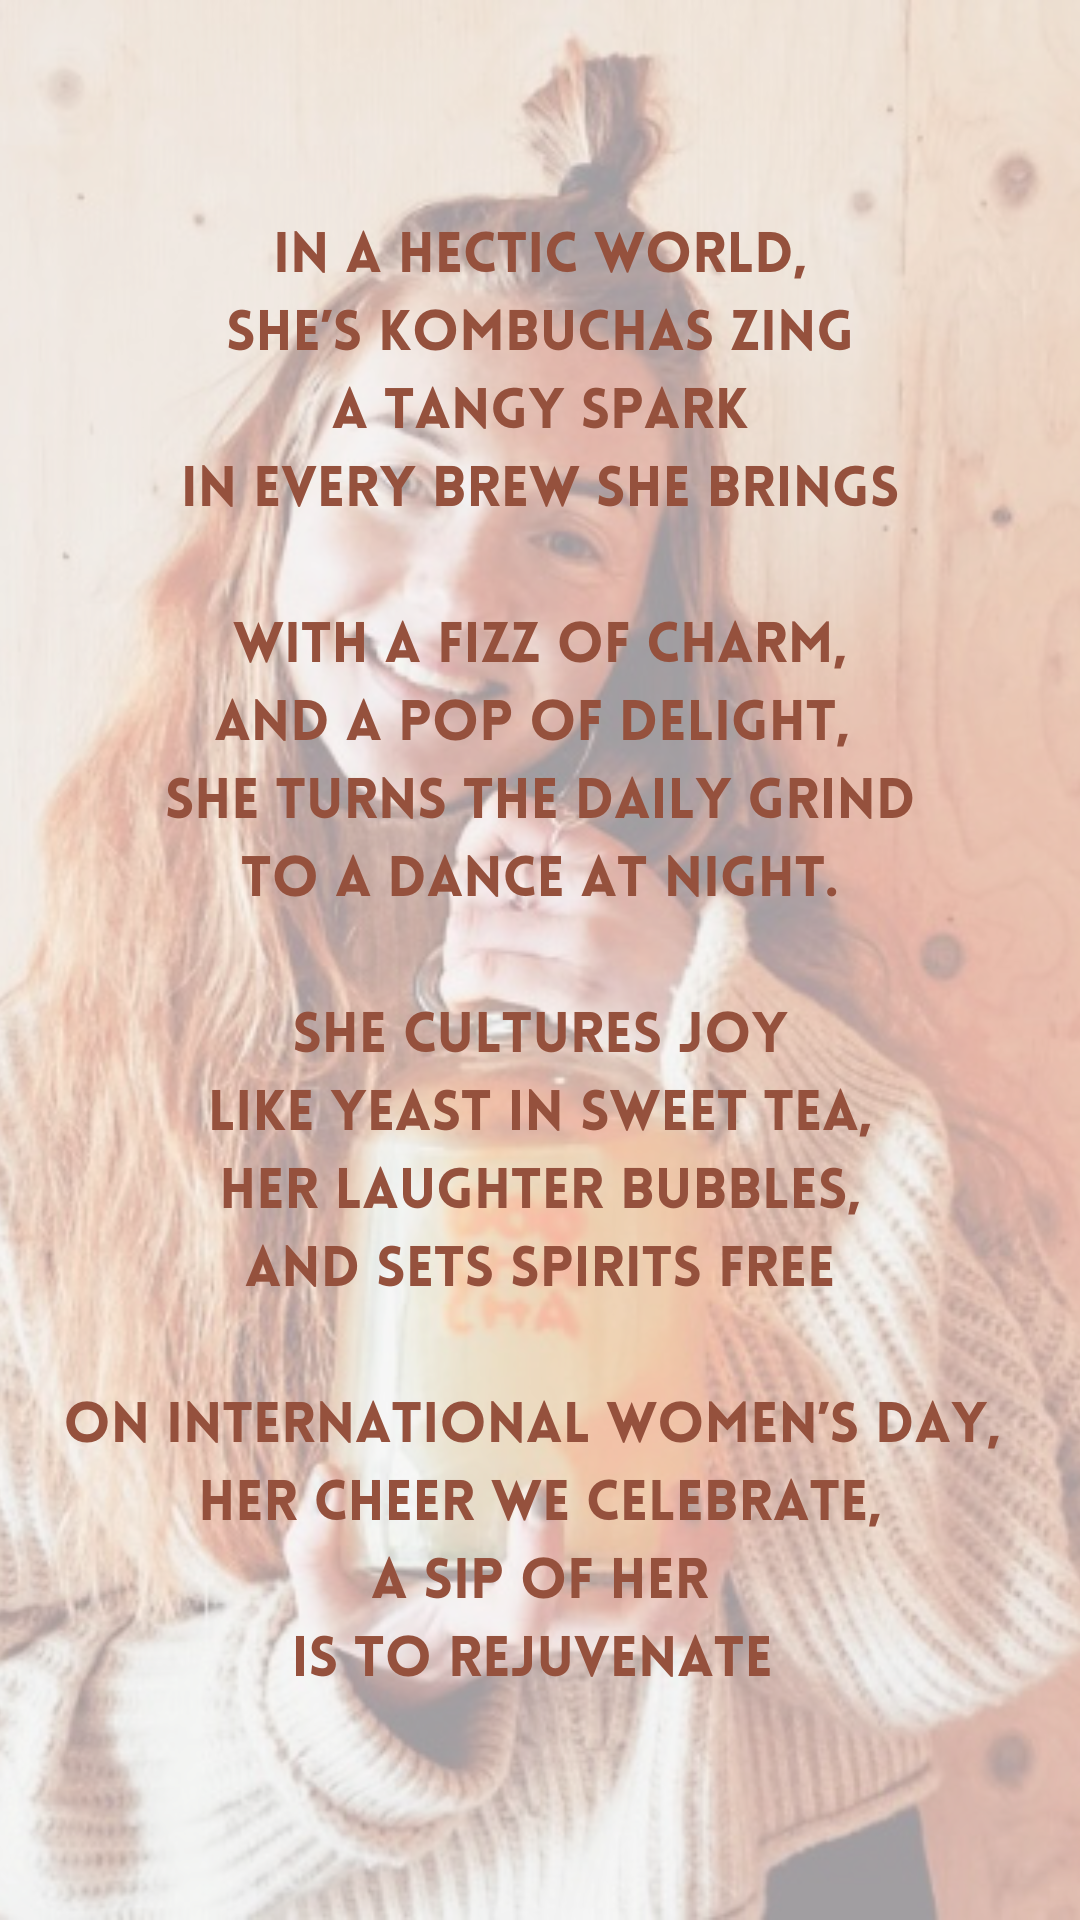 Our proud founder Hebe, showing off her bottle of delicious kombucha with the poem written in the artical, about the comparison of women to kombucha, for international womens day - boochacha 